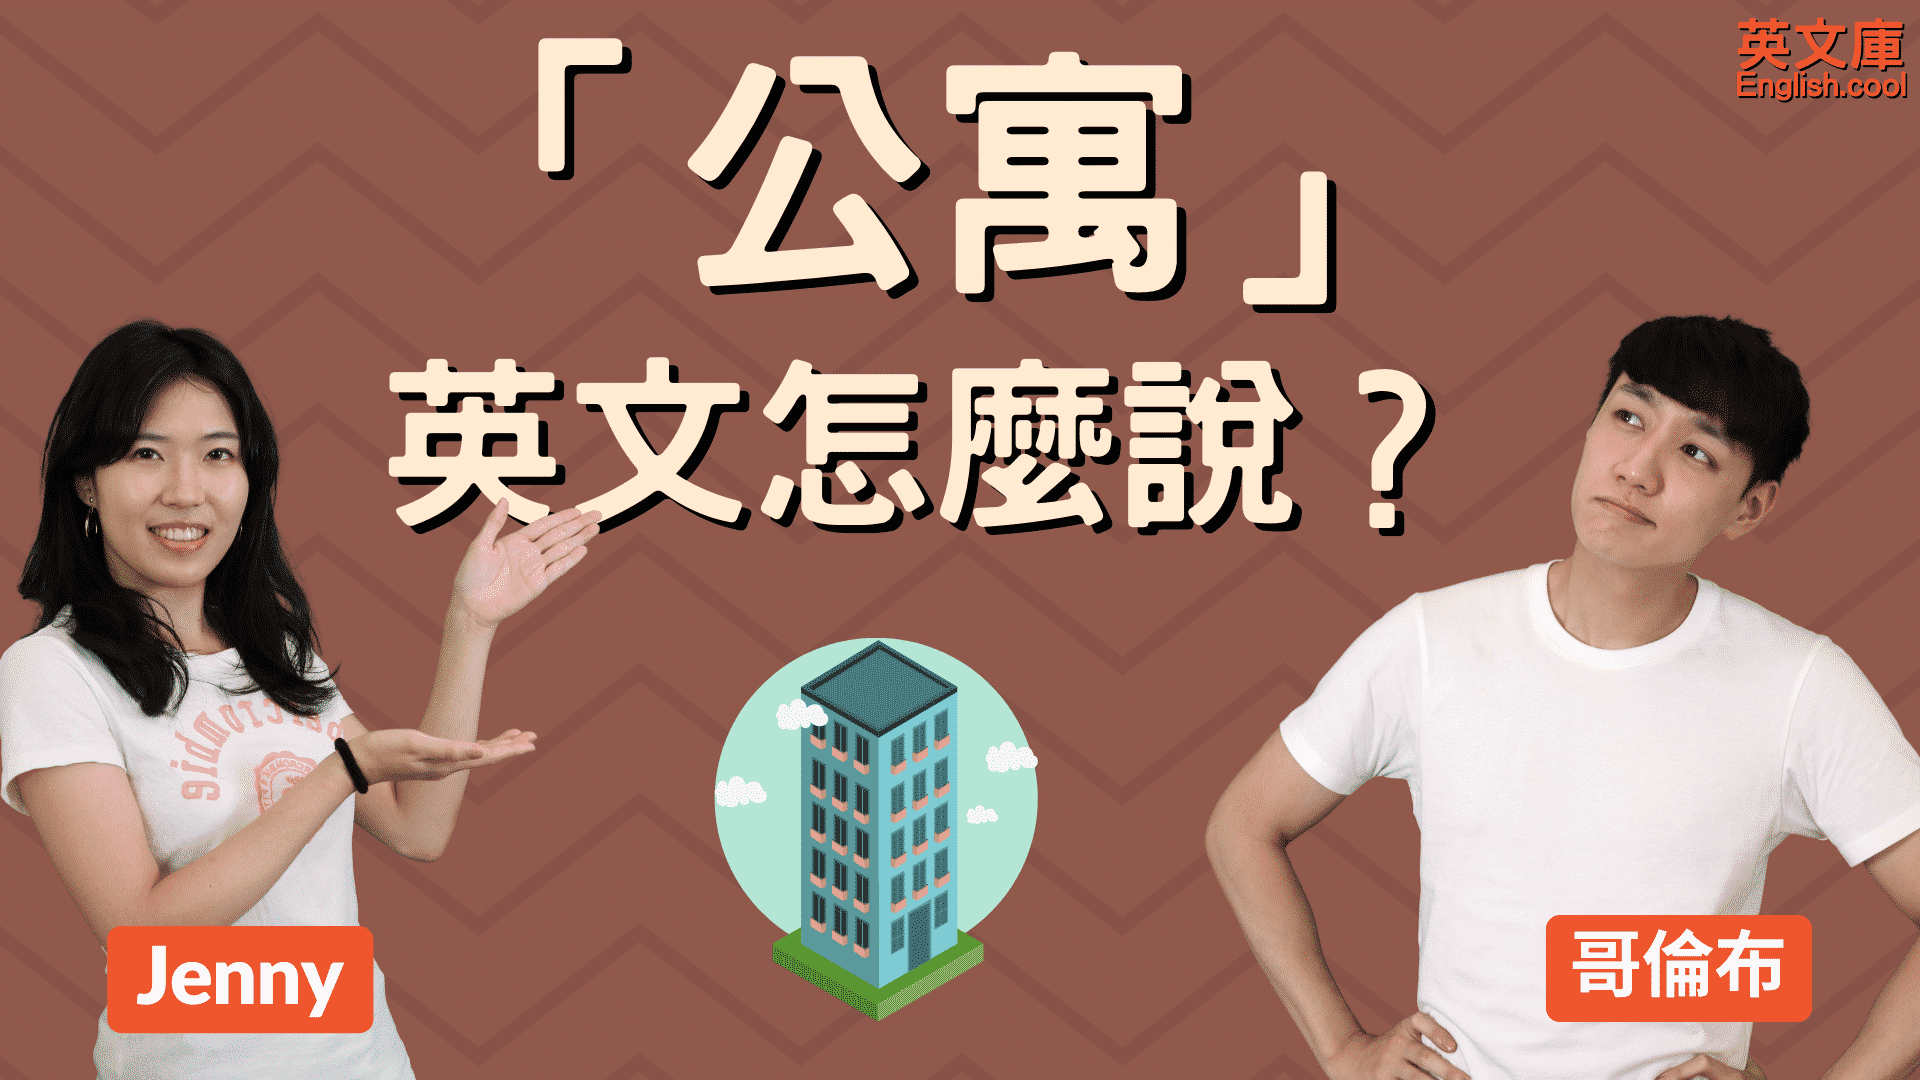 You are currently viewing Apartment, Condo, Flat 差在哪？來搞懂「公寓」英文翻譯！